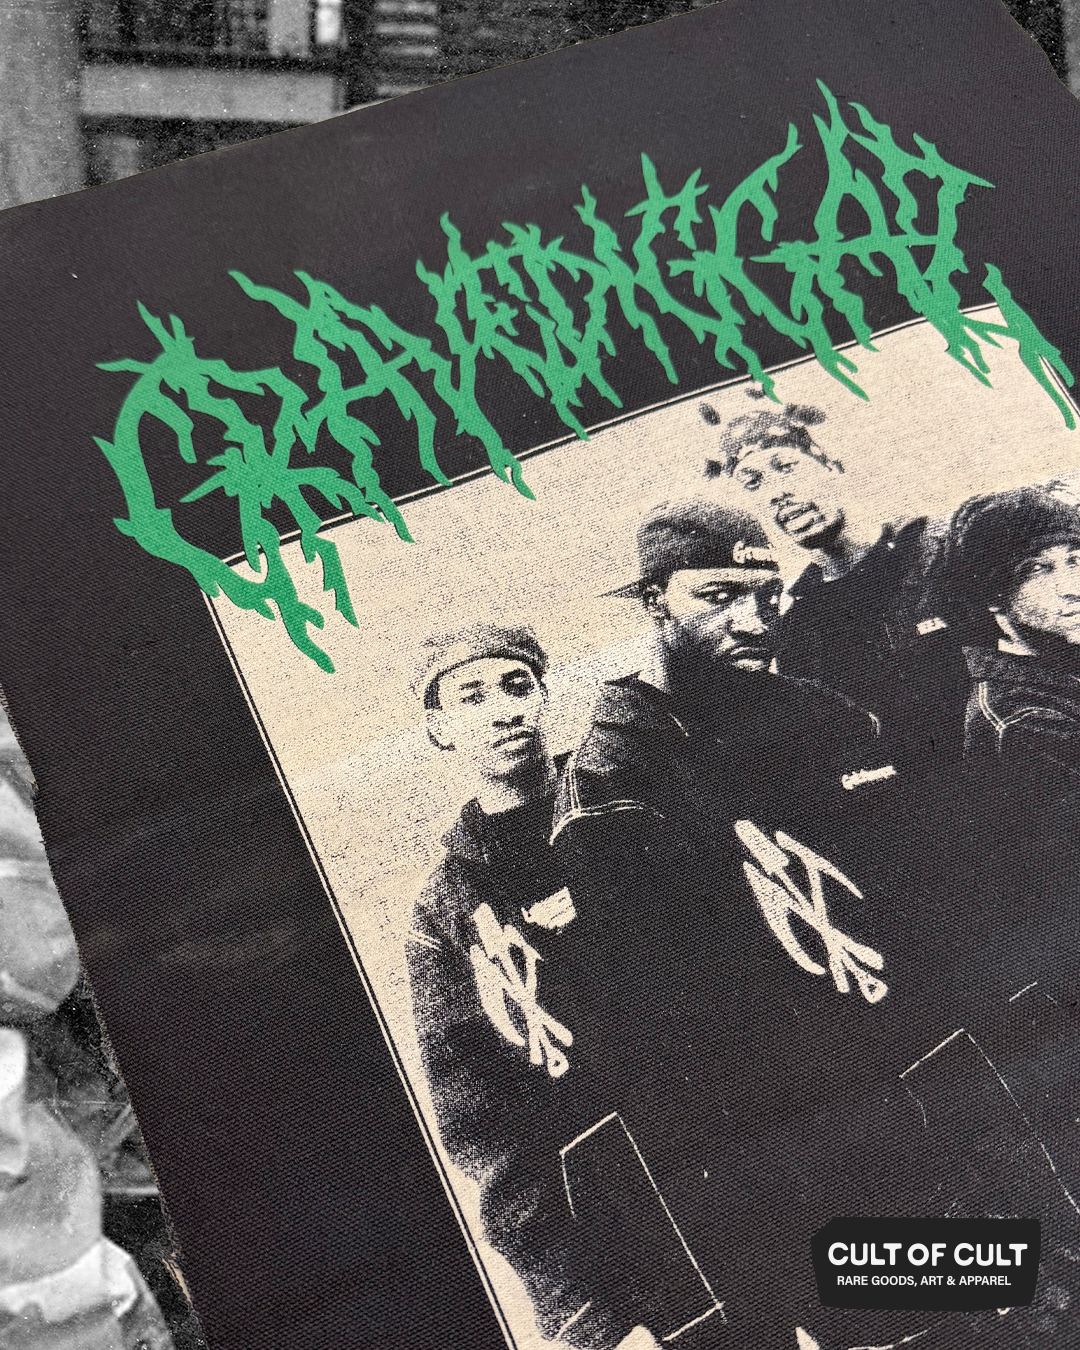 a detailed close up view of the Gravediggaz black back patch